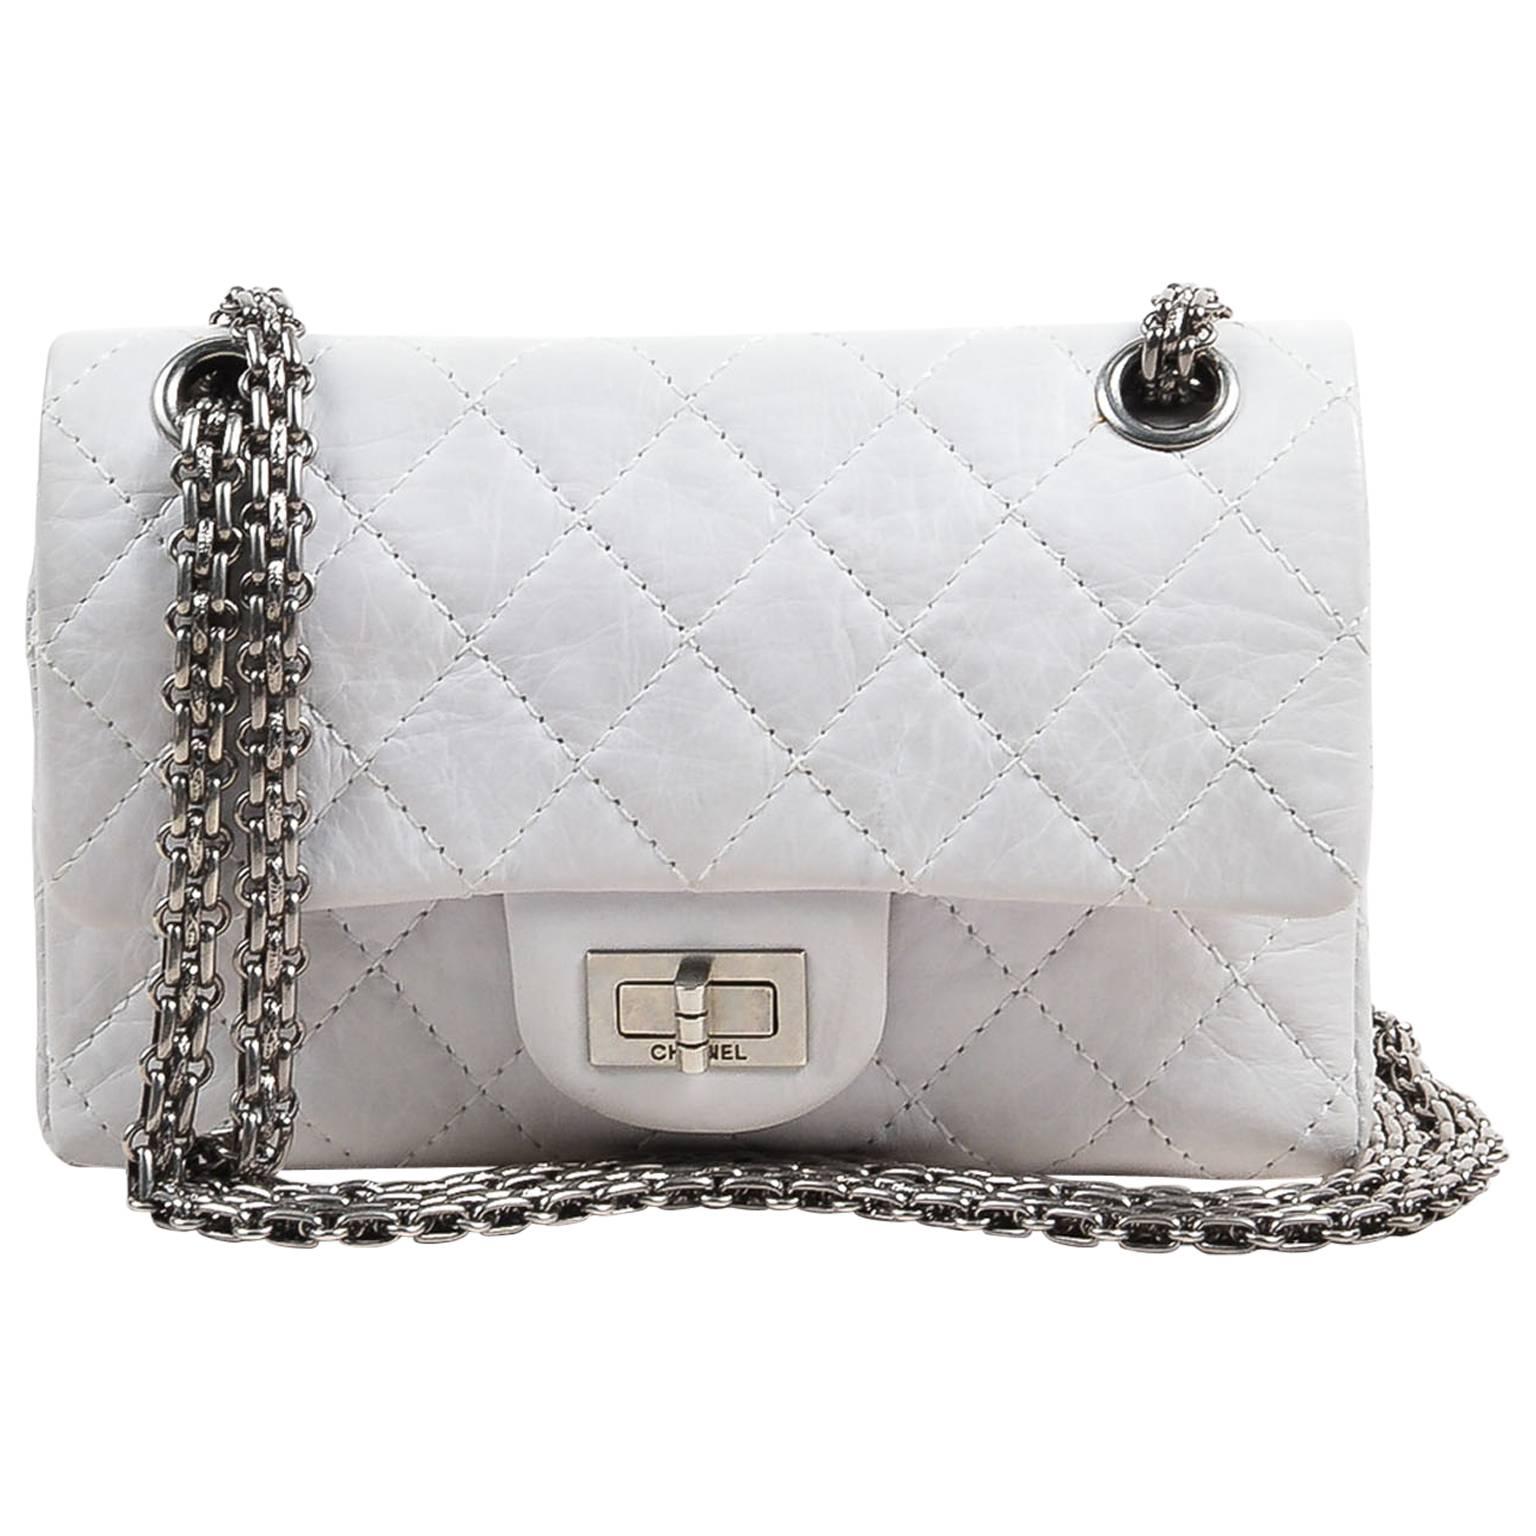 Chanel White Aged Calf Skin "New Mini" 2.55 2005 Limited Ed Reissue Flap Bag For Sale